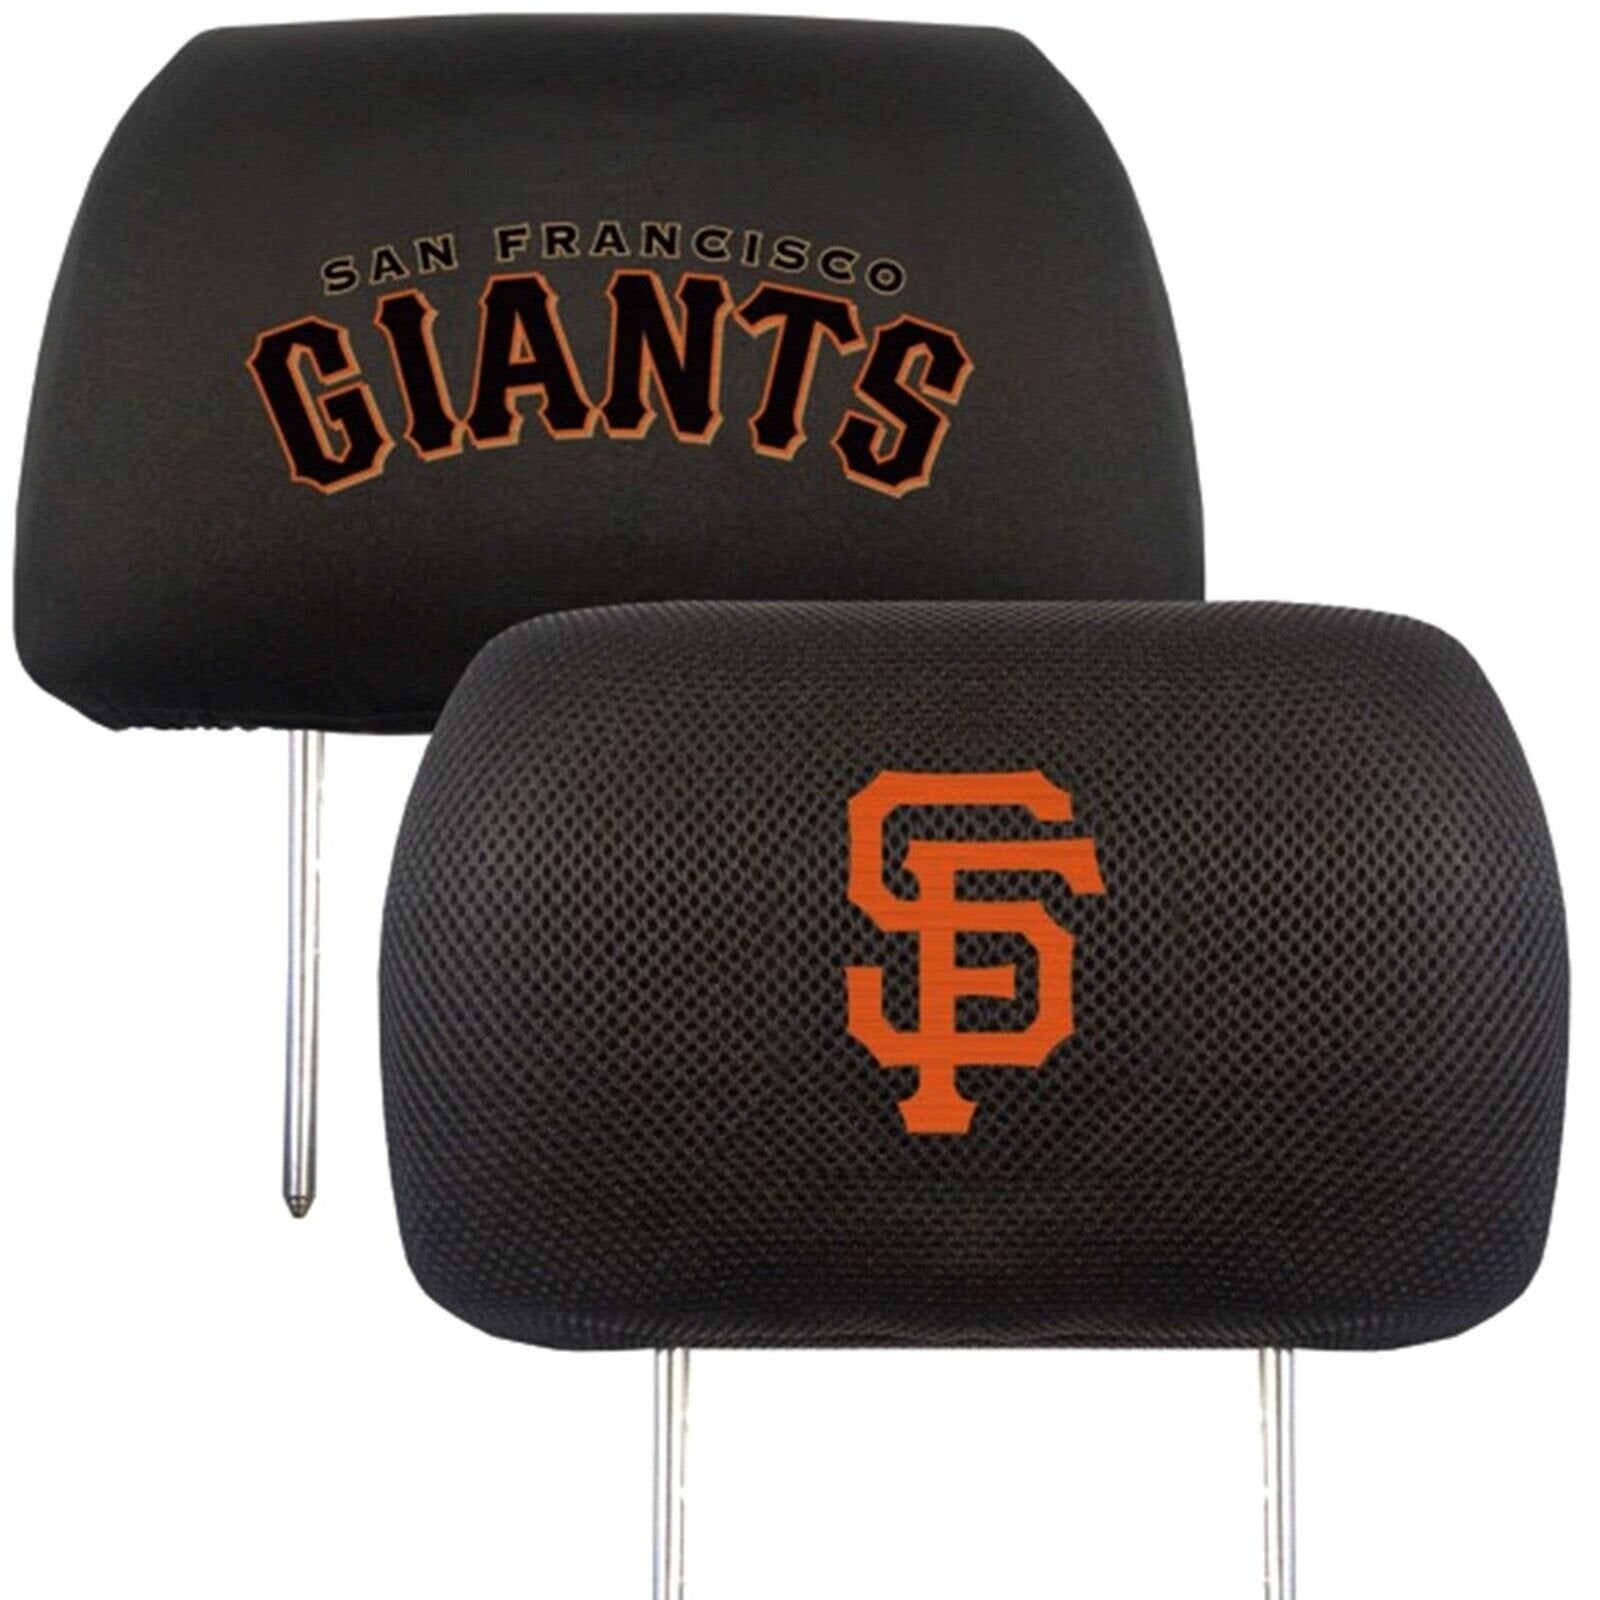 San Francisco Giants Pair of Premium Auto Head Rest Covers, Embroidered, Black Elastic, 14x10 Inch